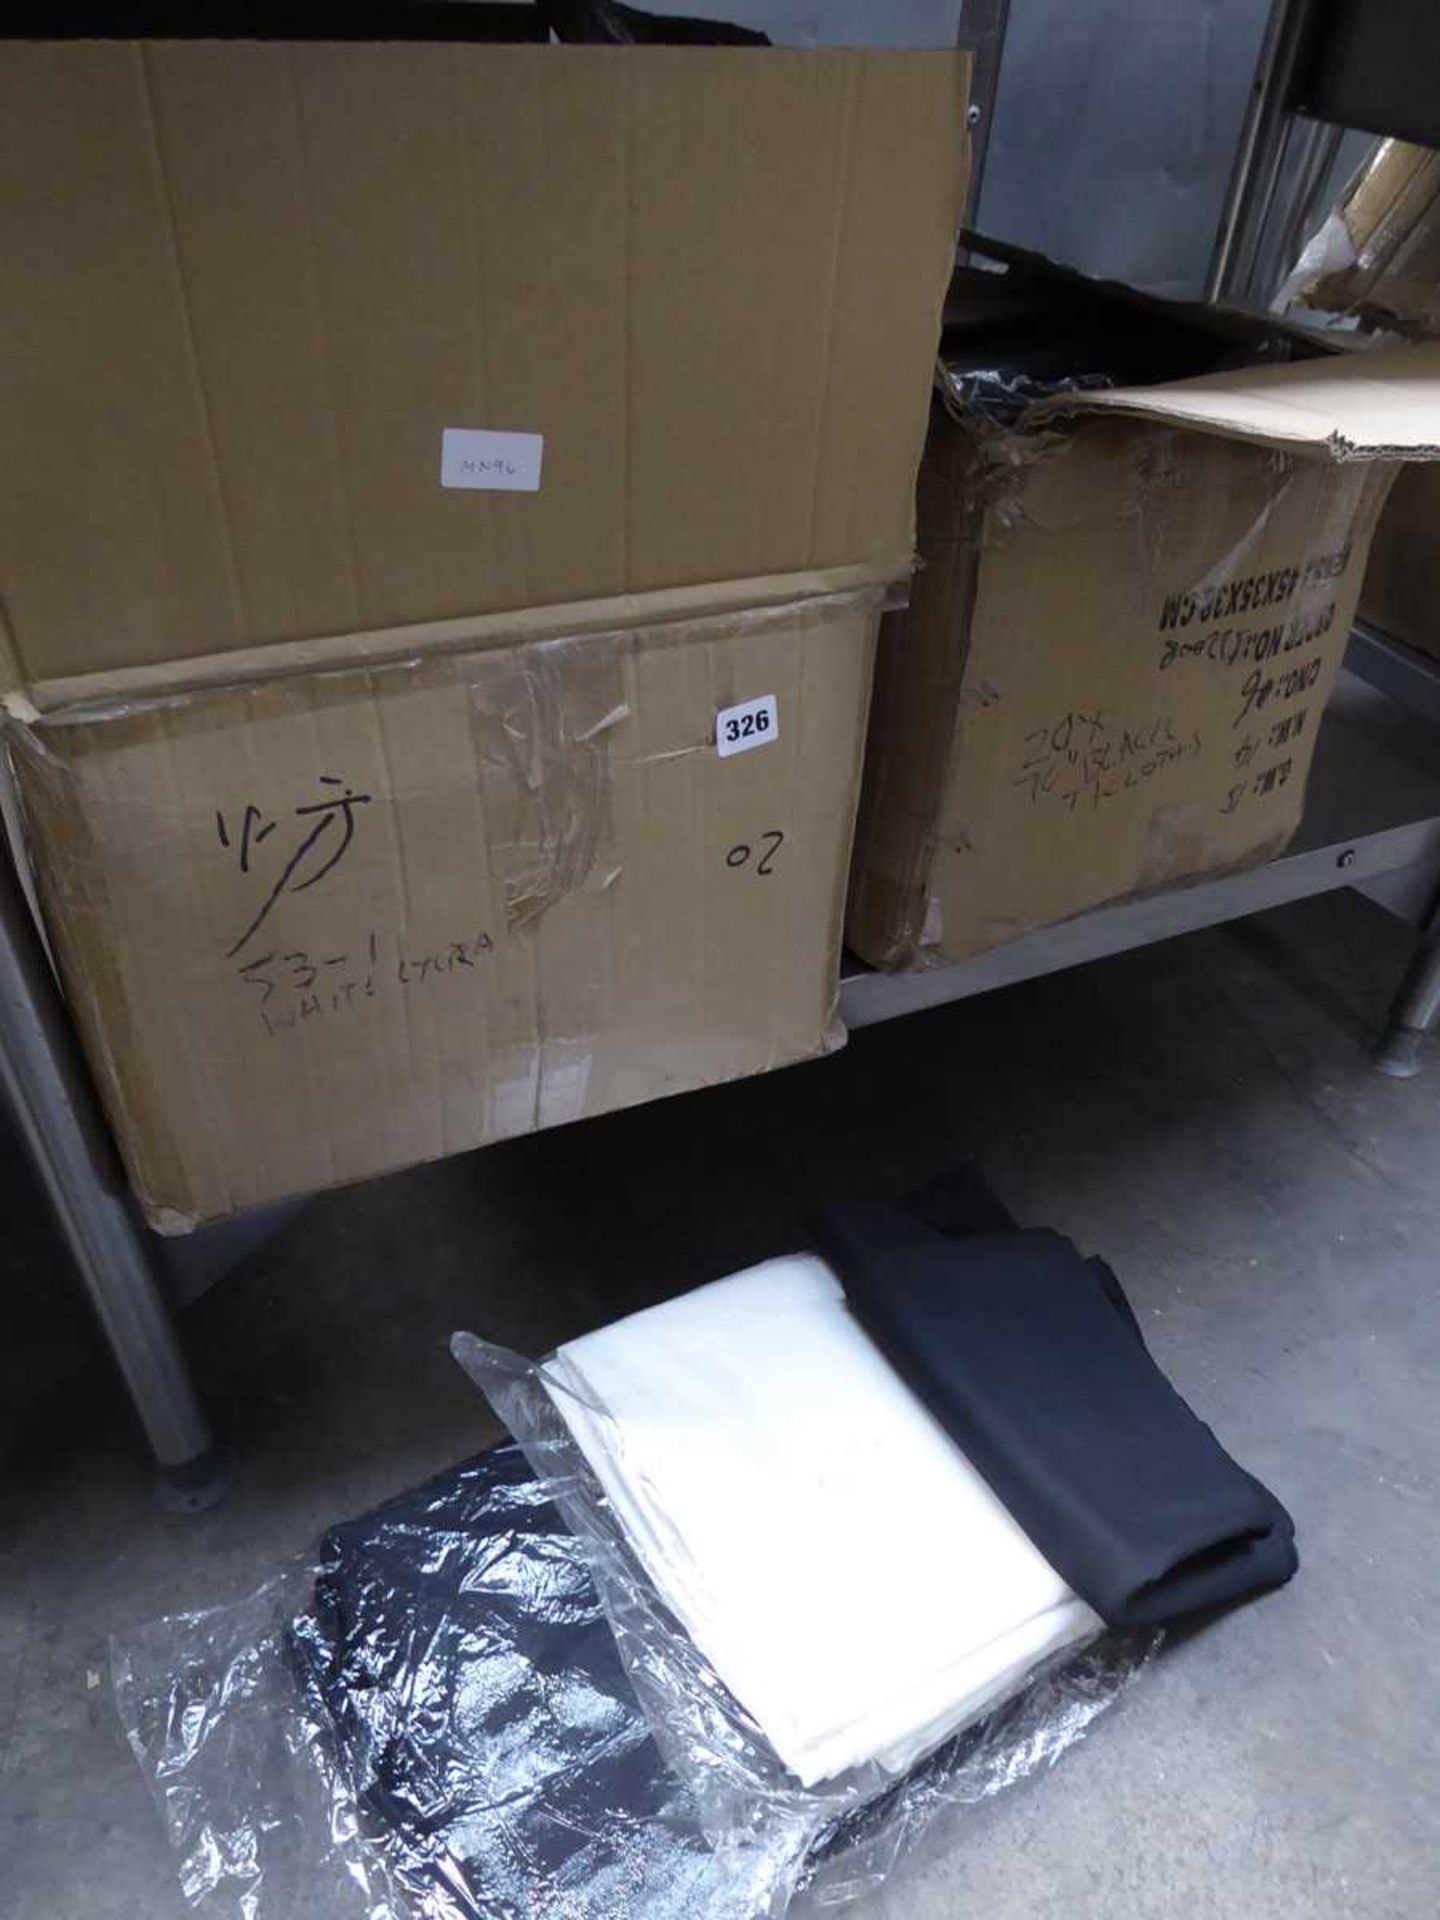 2 x large boxes containing black and white table cloths